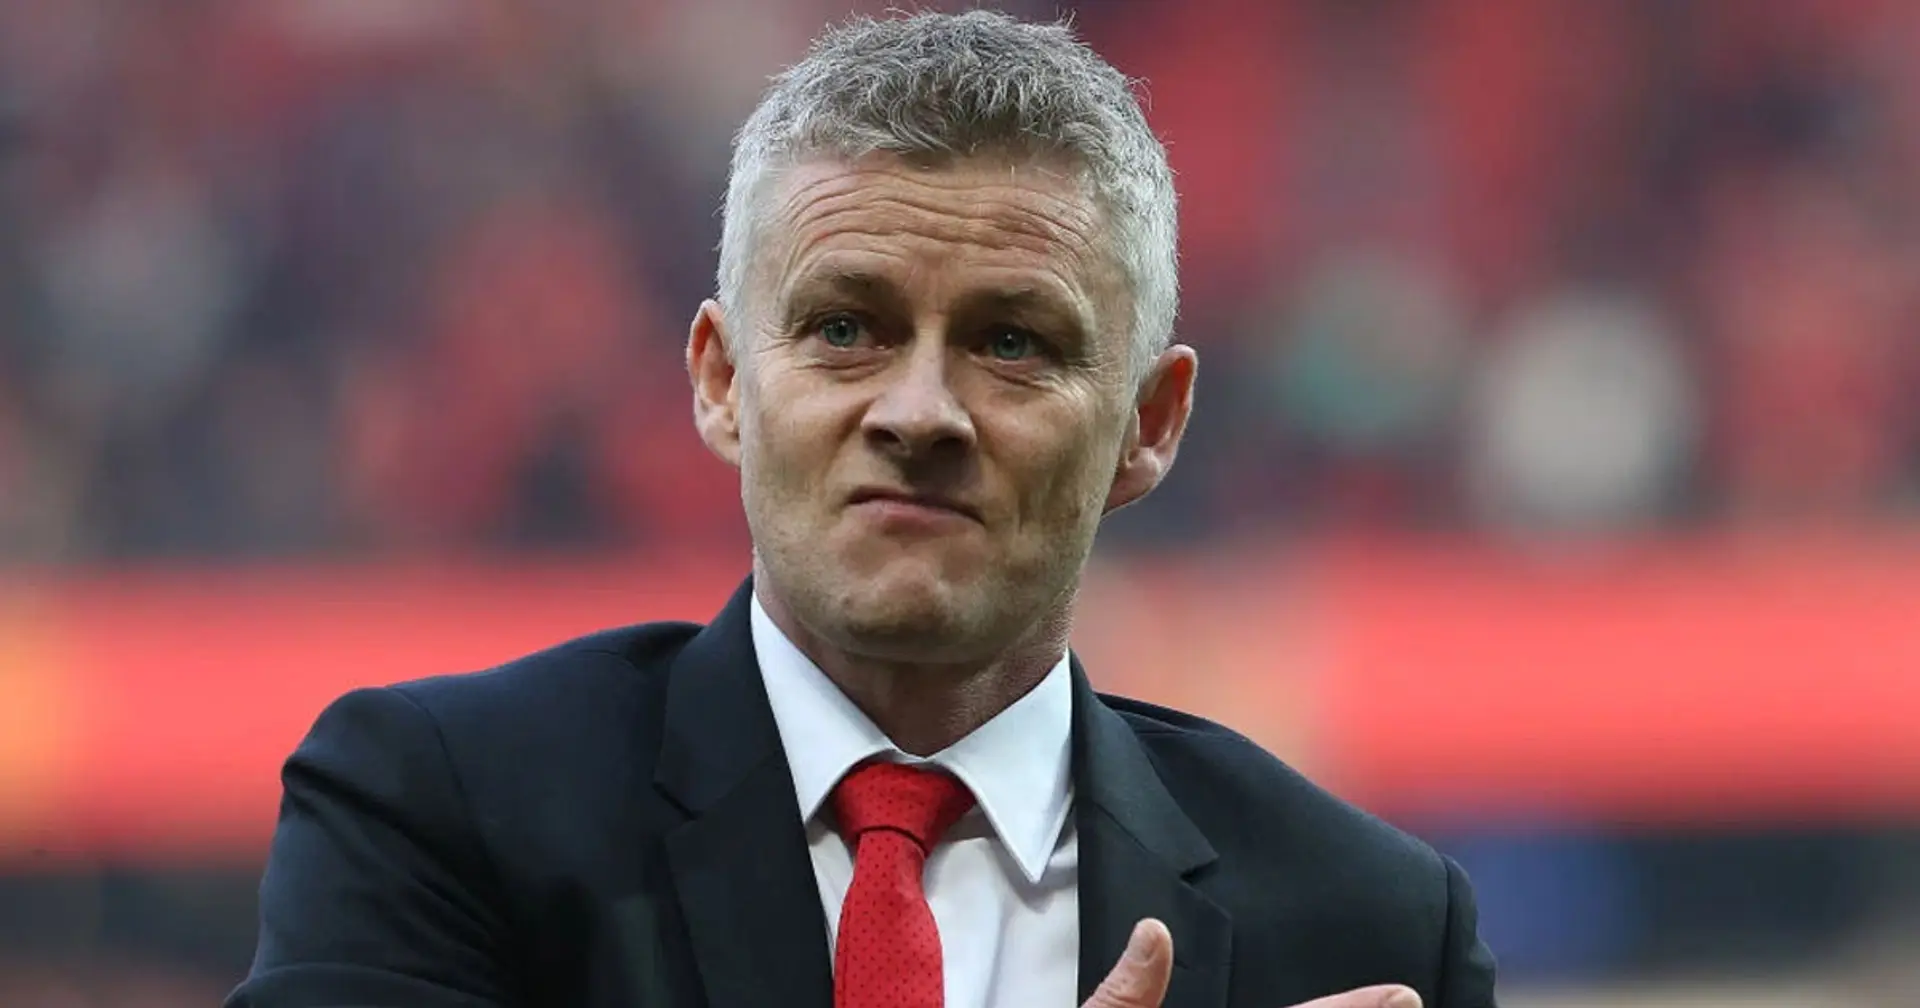 Premier League 2021/22 fixtures revealed: Man United to face Leeds United on matchday 1